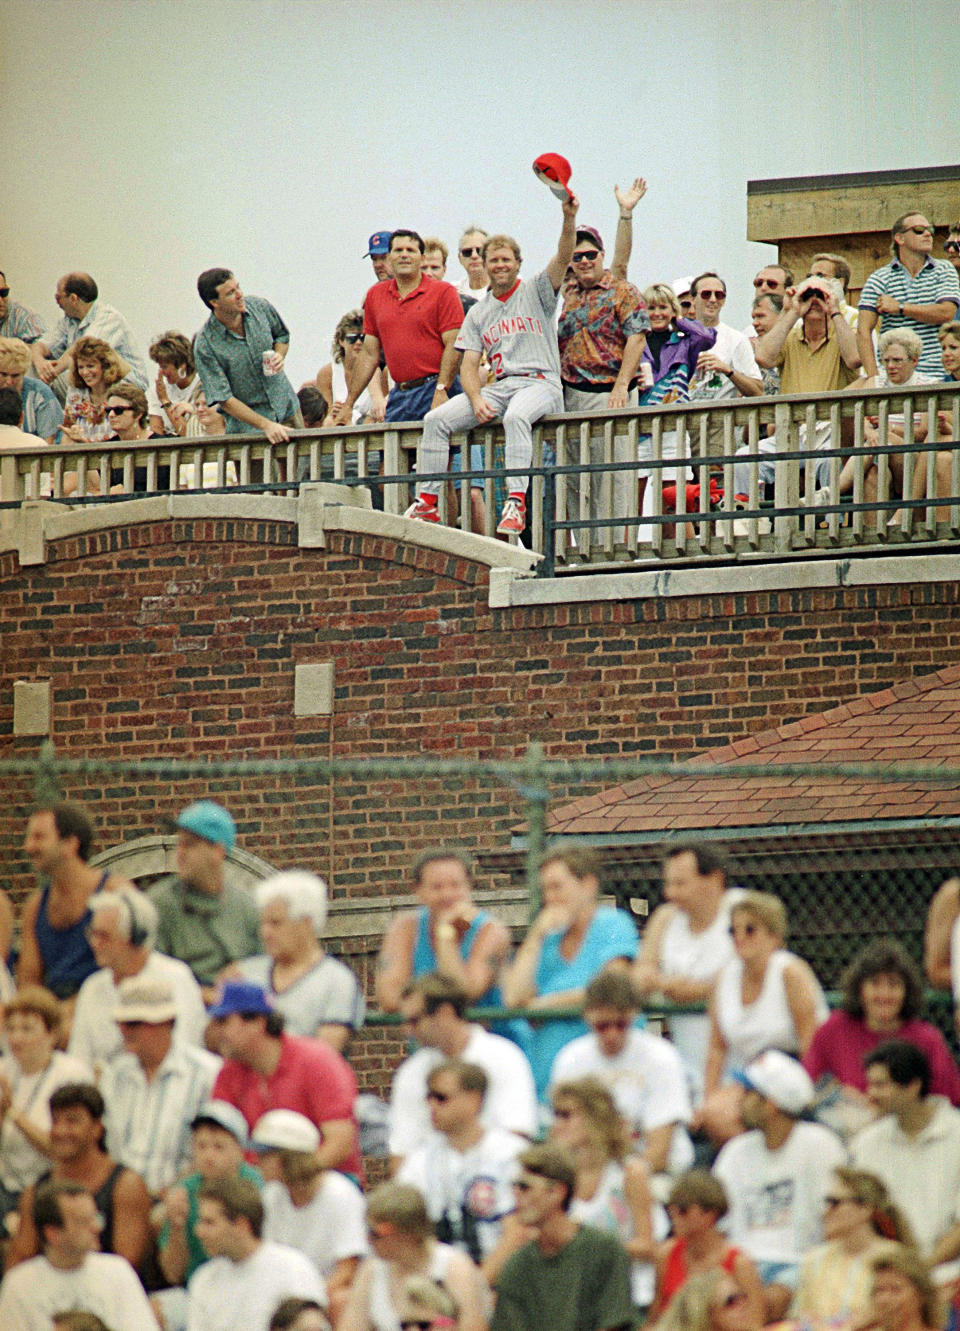 FILE - Cincinnati Reds pitcher Tom Browning, center, waves from a roof on Sheffield Avenue across from Wrigley Field in Chicago as he watches the Reds' game against the Chicago Cubs, July 7, 1993. Browning was not scheduled to pitch. Browning, an All-Star pitcher who threw the only perfect game in Cincinnati Reds history and helped them win a World Series title, died on Monday, Dec. 19, 2022. He was 62. (AP Photo/John Swart, File)